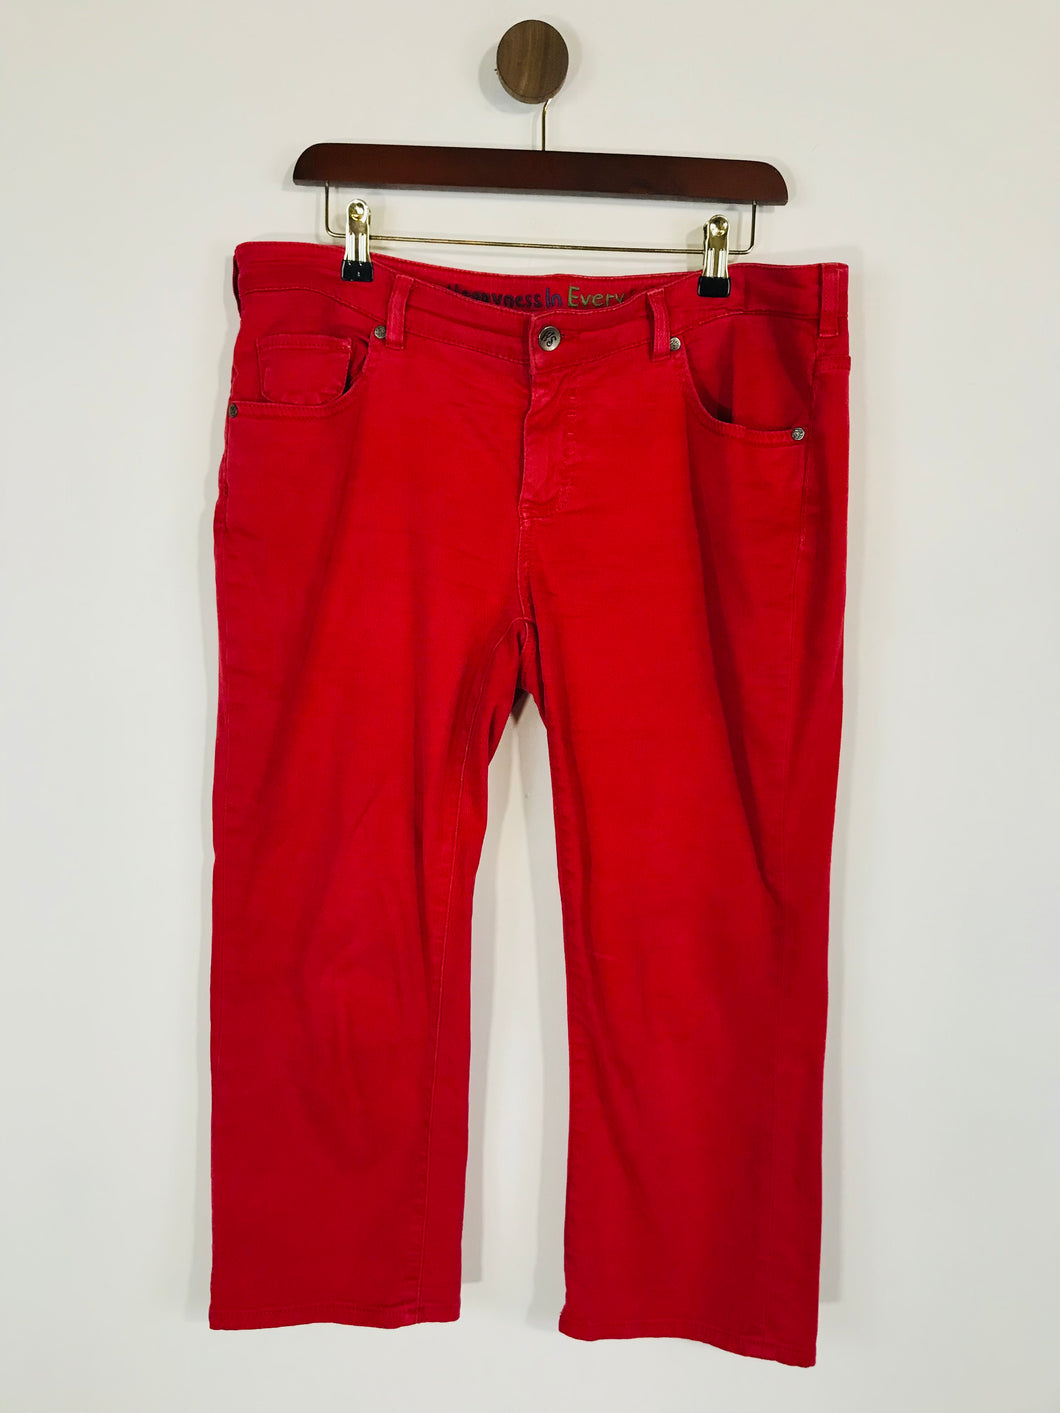 White Stuff Women's Cotton Casual Trousers | UK14 | Red